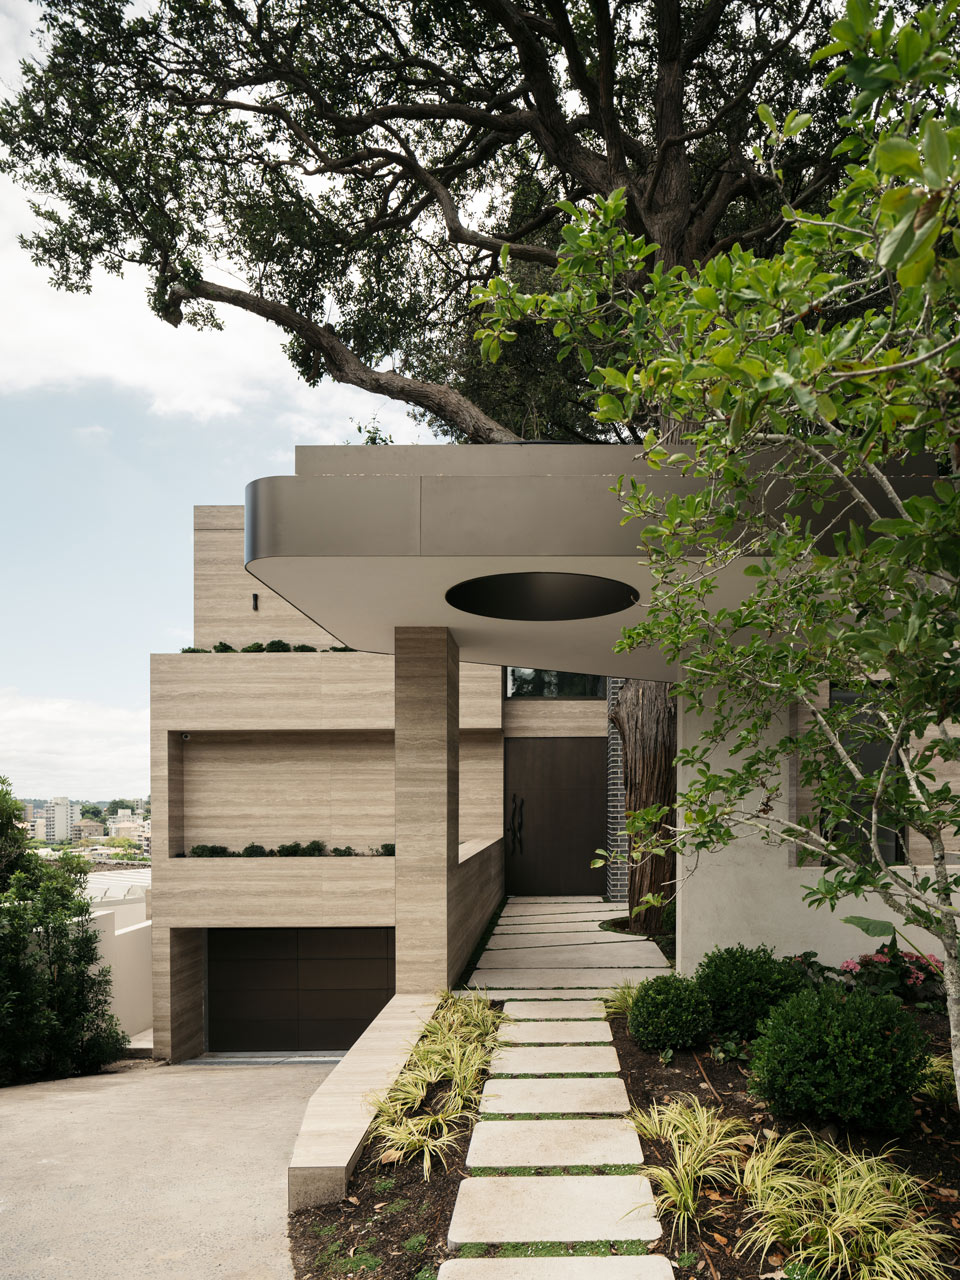 Modern architectural home with textured beige facade, featuring a circular cut-out overhang and a pathway lined with stepping stones and lush greenery.